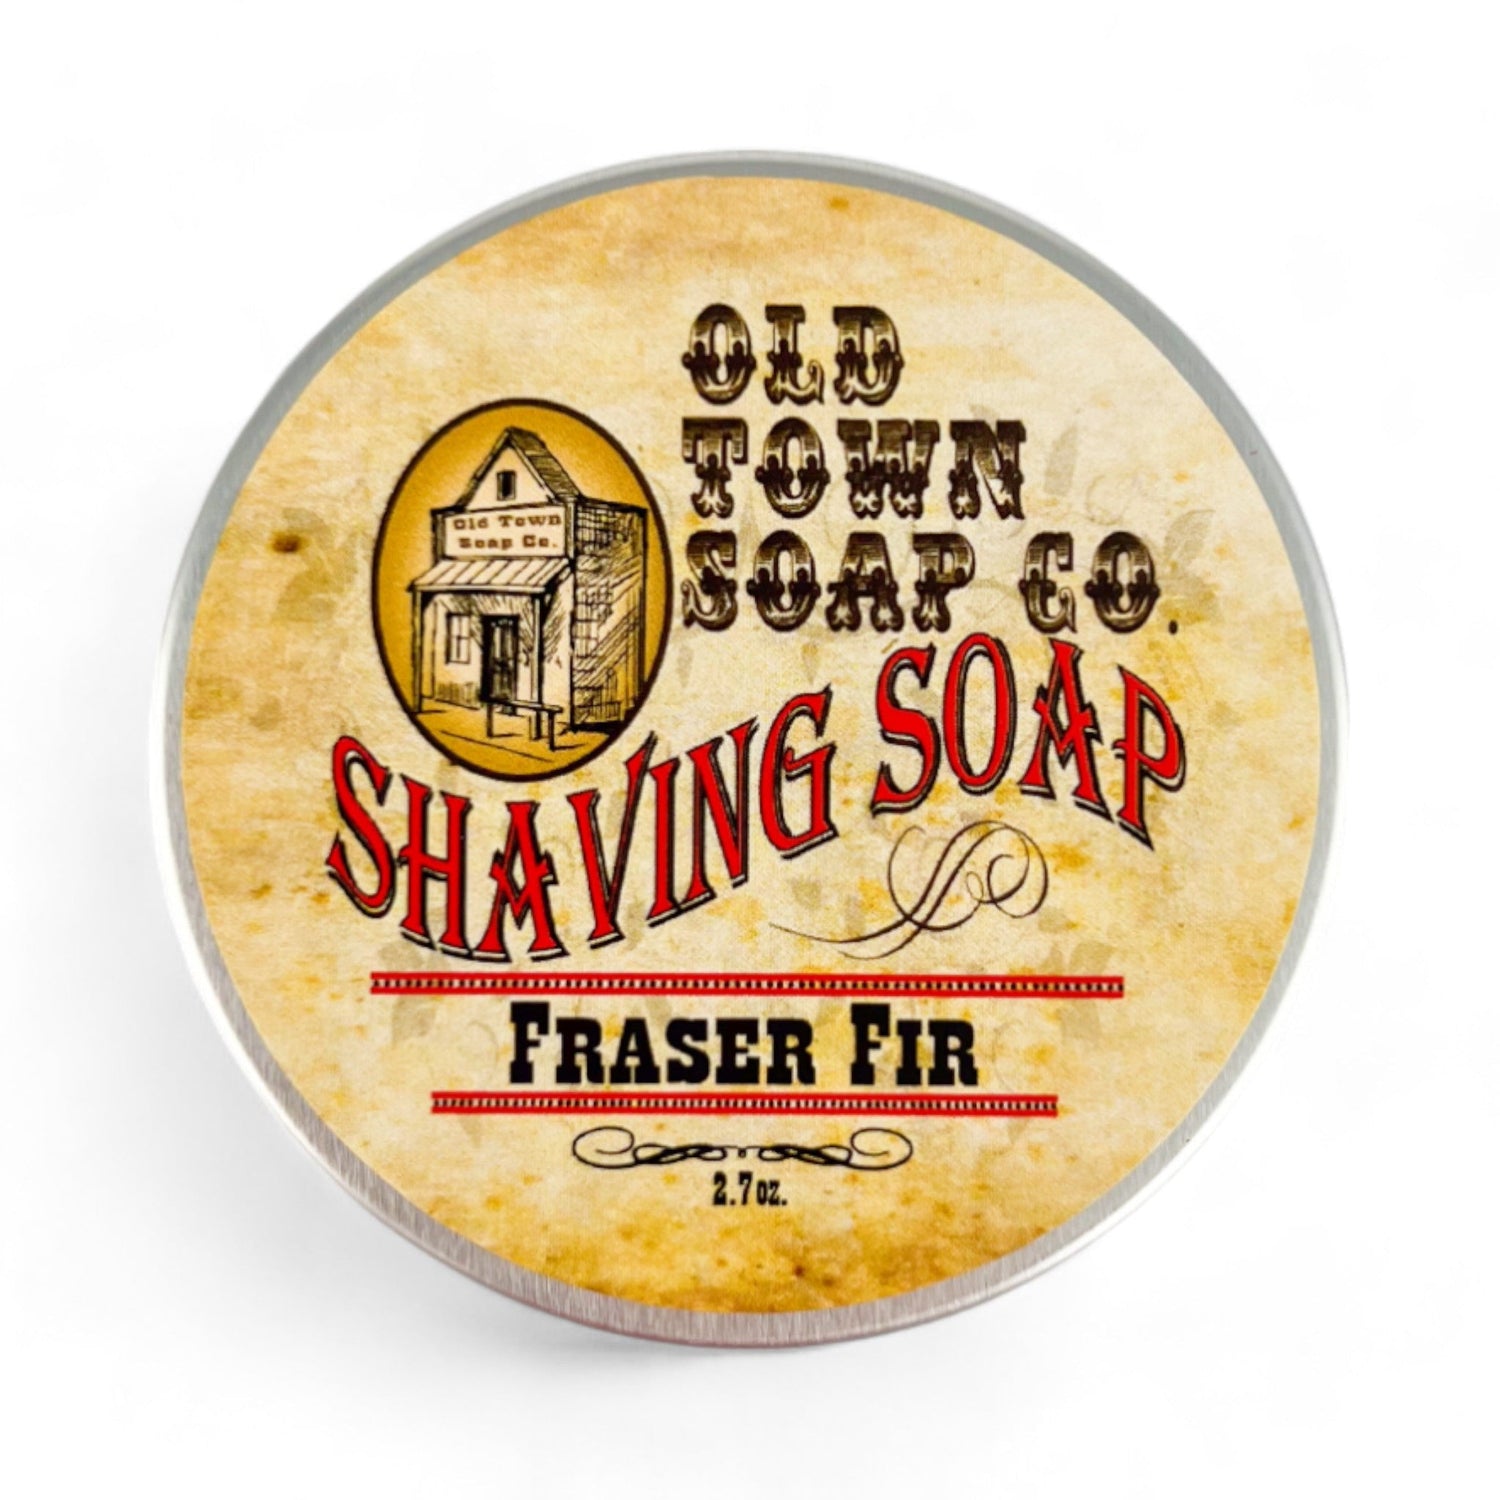 Fraser Fir -Shave Soap Tin - Old Town Soap Co.